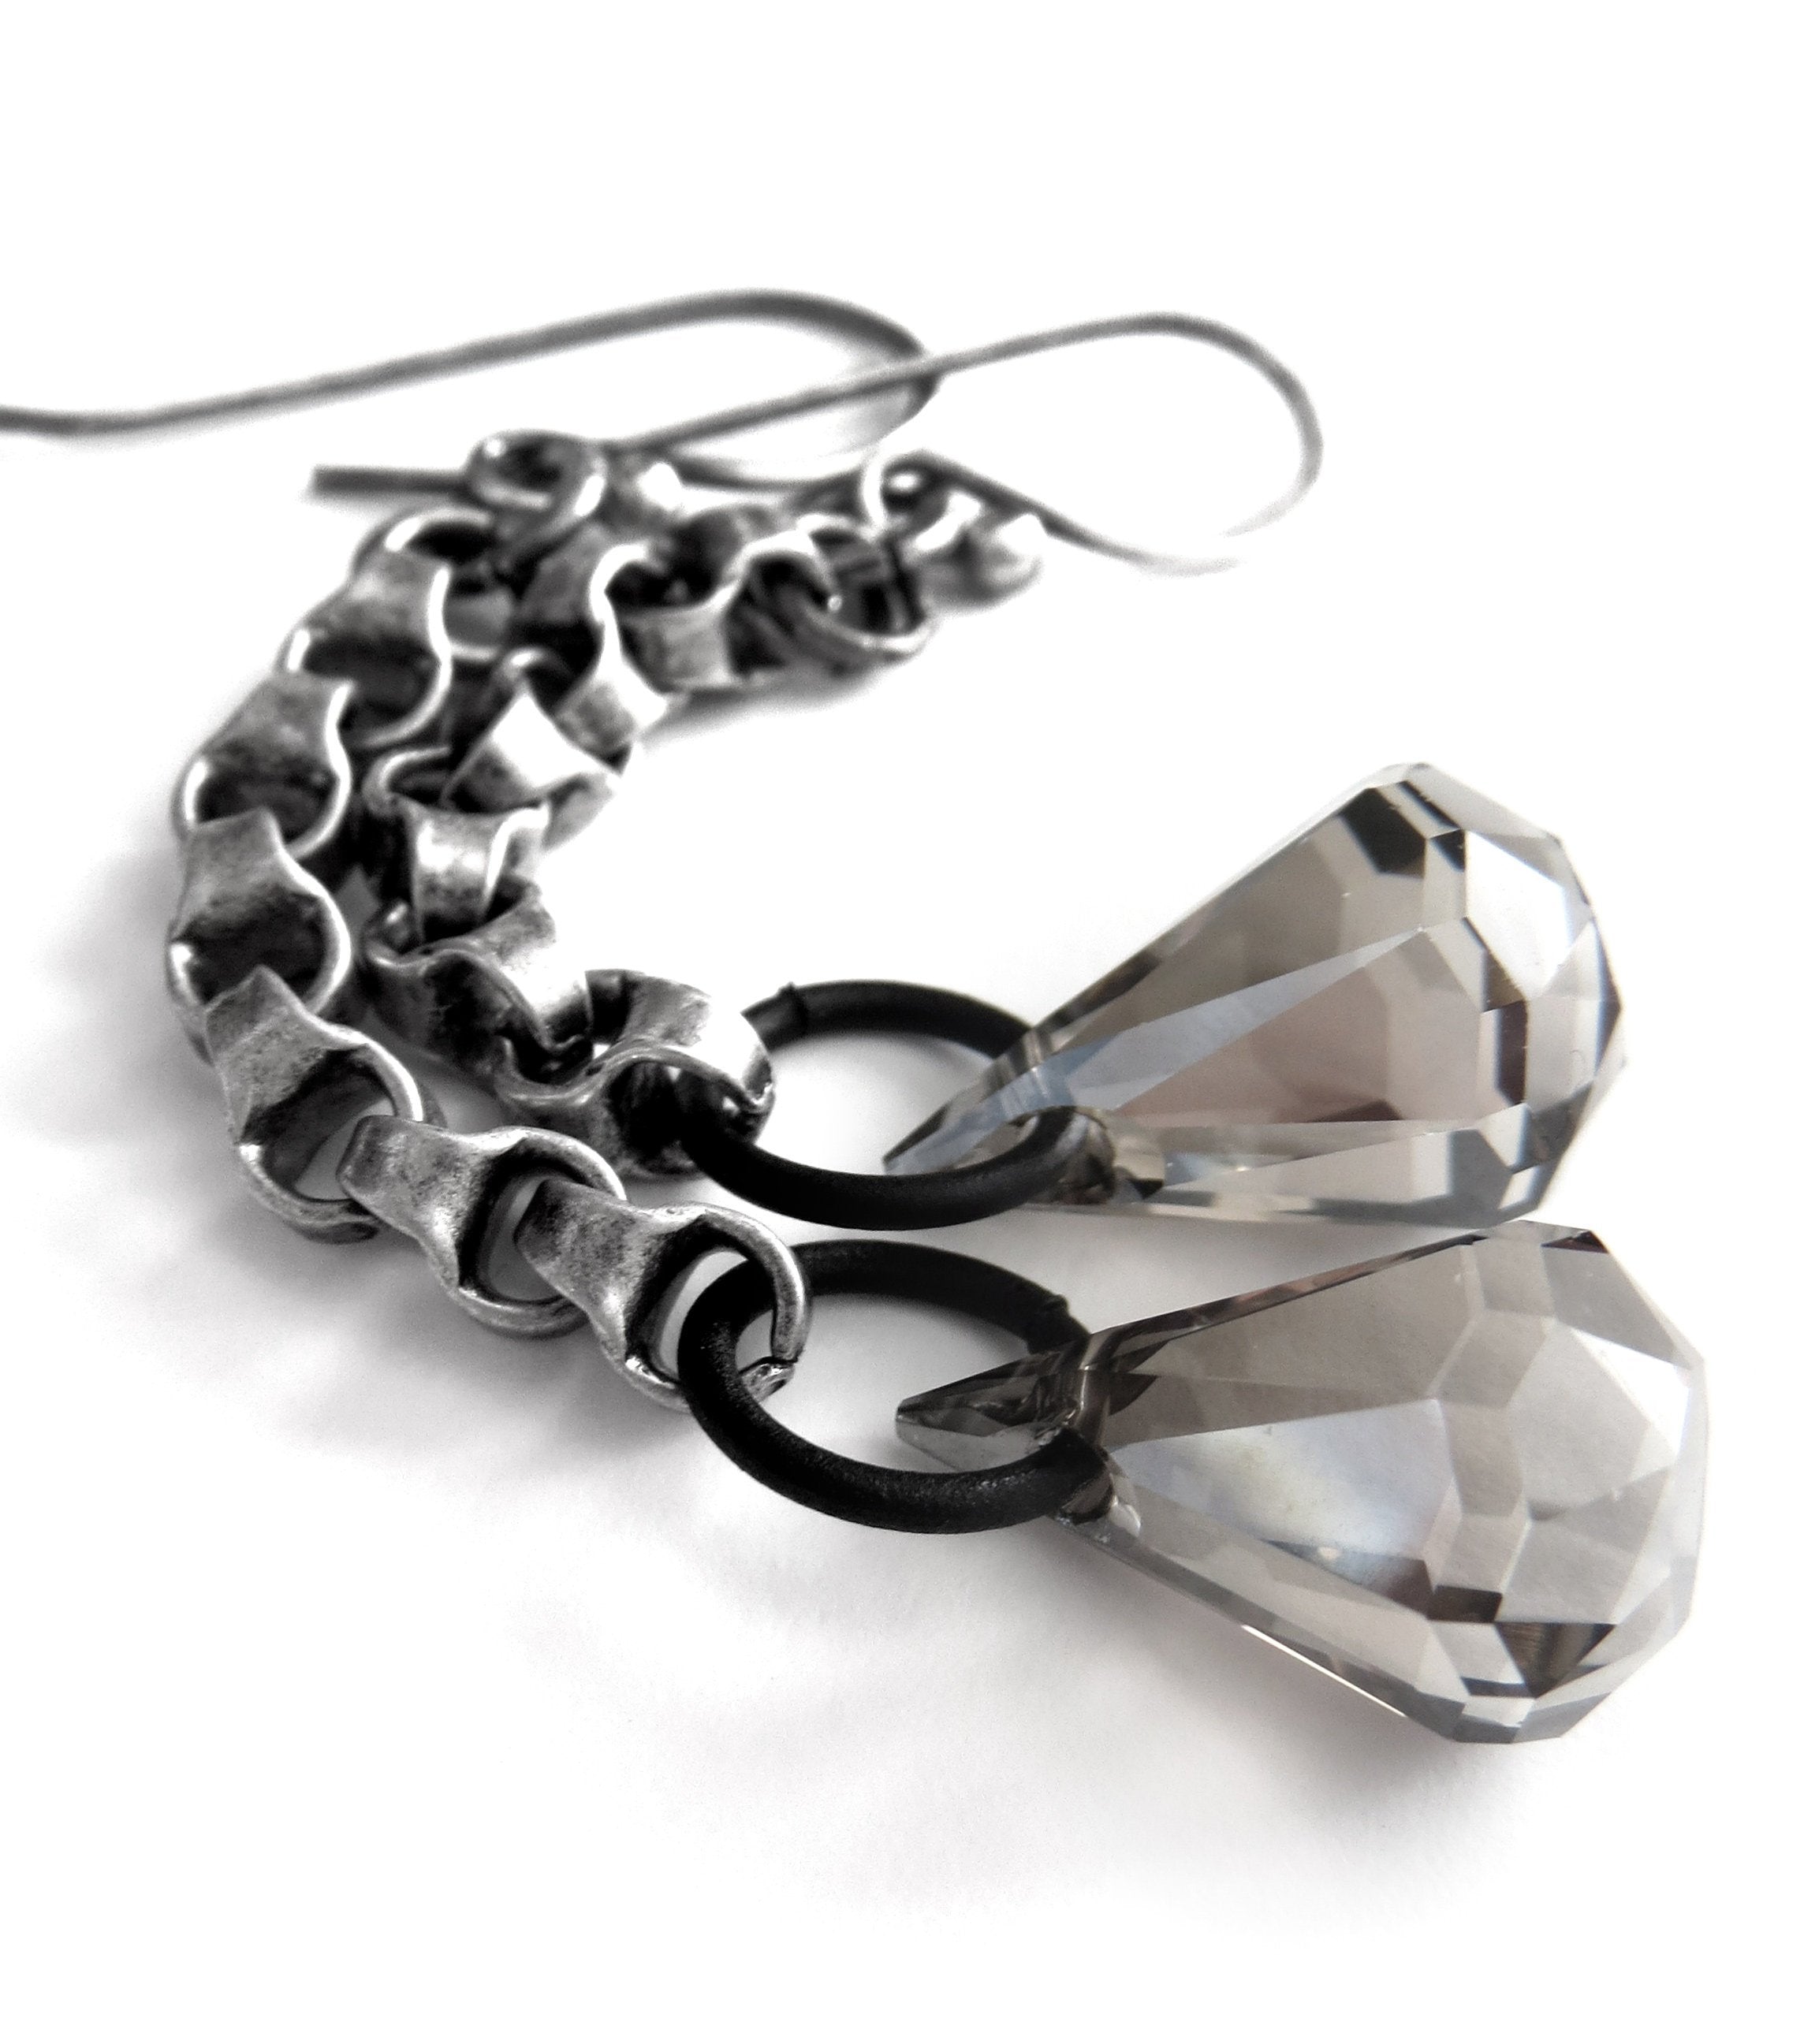 EXACT - Long Chain Earrings with Sheer Grey Swarovski Crystals - Architectural Geometric Modern Jewelry